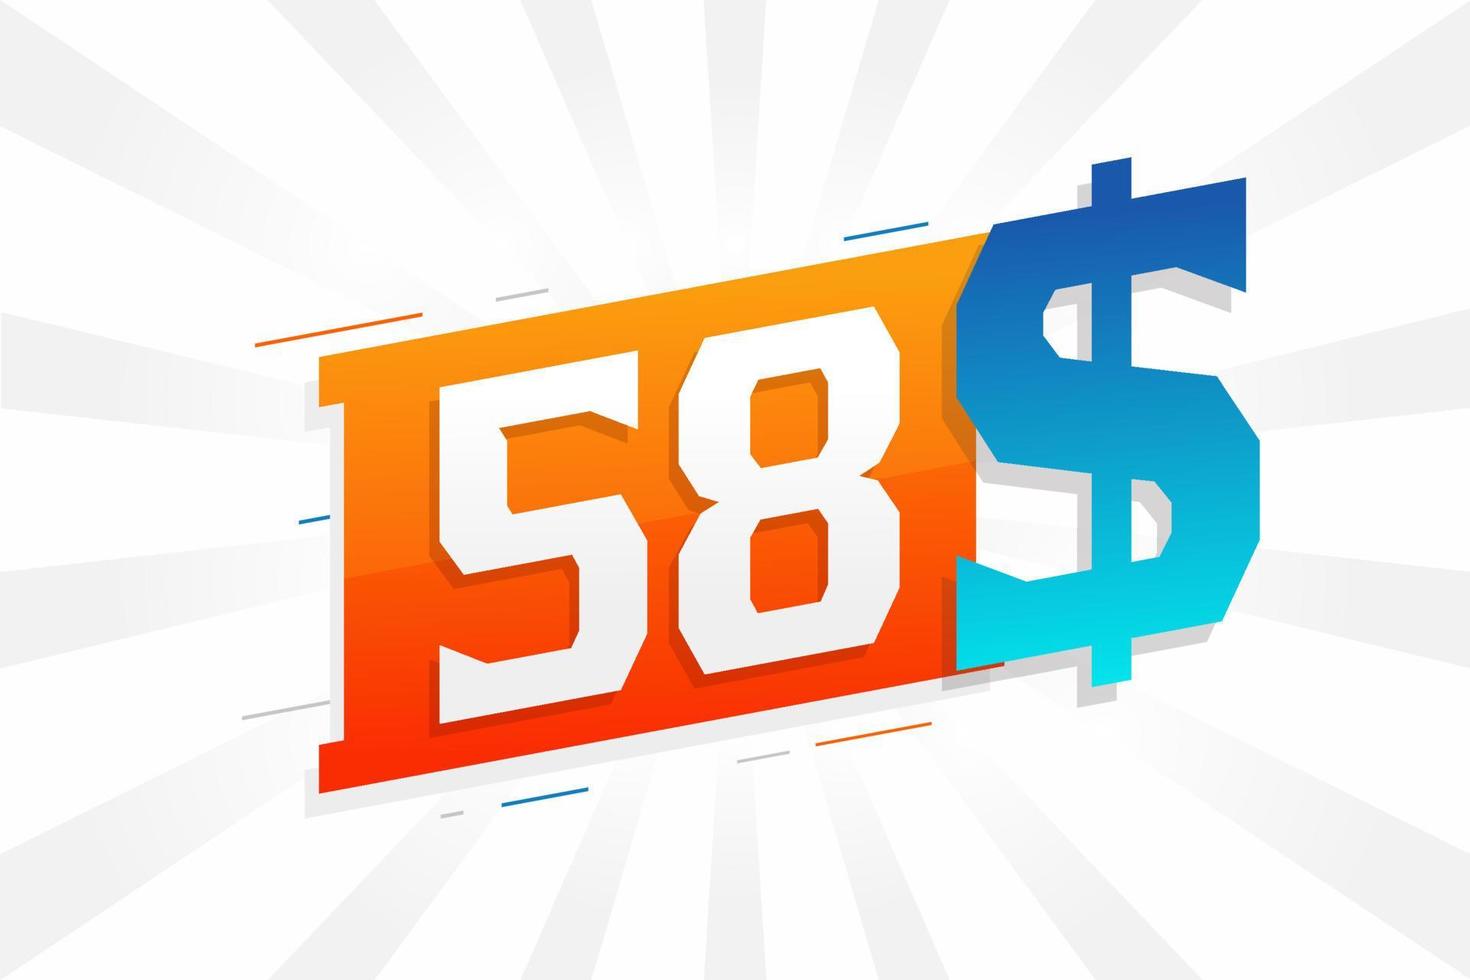 58 Dollar currency vector text symbol. 58 USD United States Dollar American Money stock vector